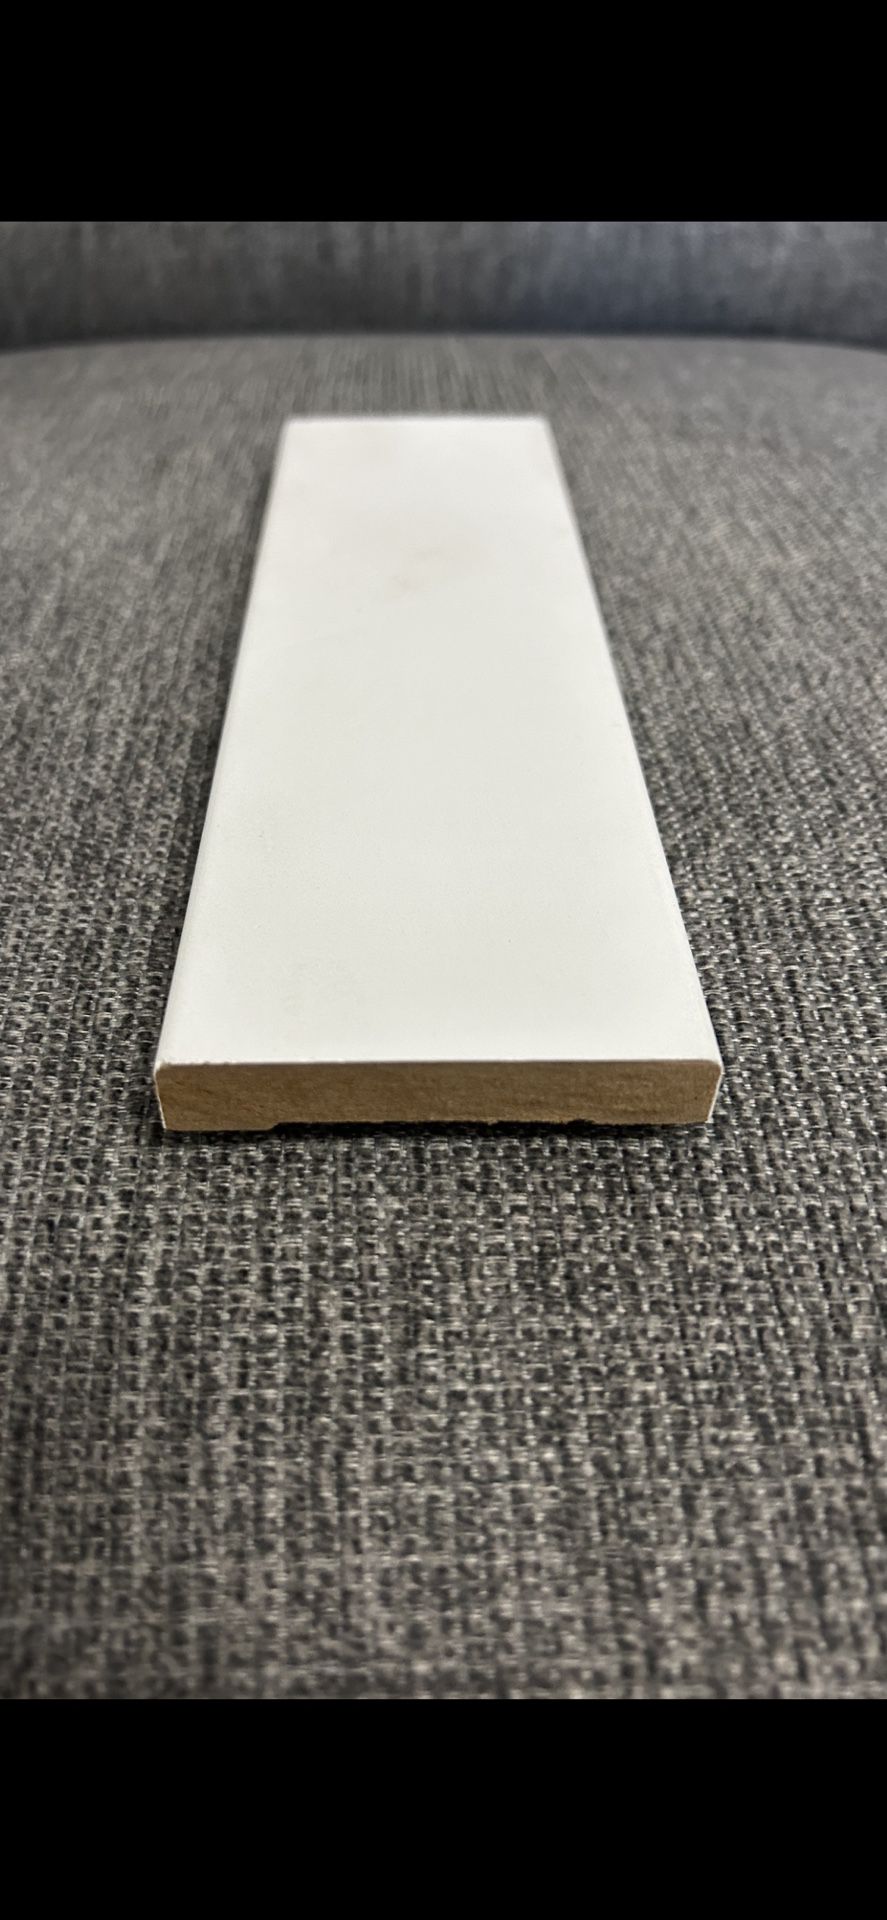 2-1/2 inch Flat/Squared door casing $9.86  / Window Casing Moulding SPECIAL PIRCR 58 Cents Per Foot 17 Feet Long  and 